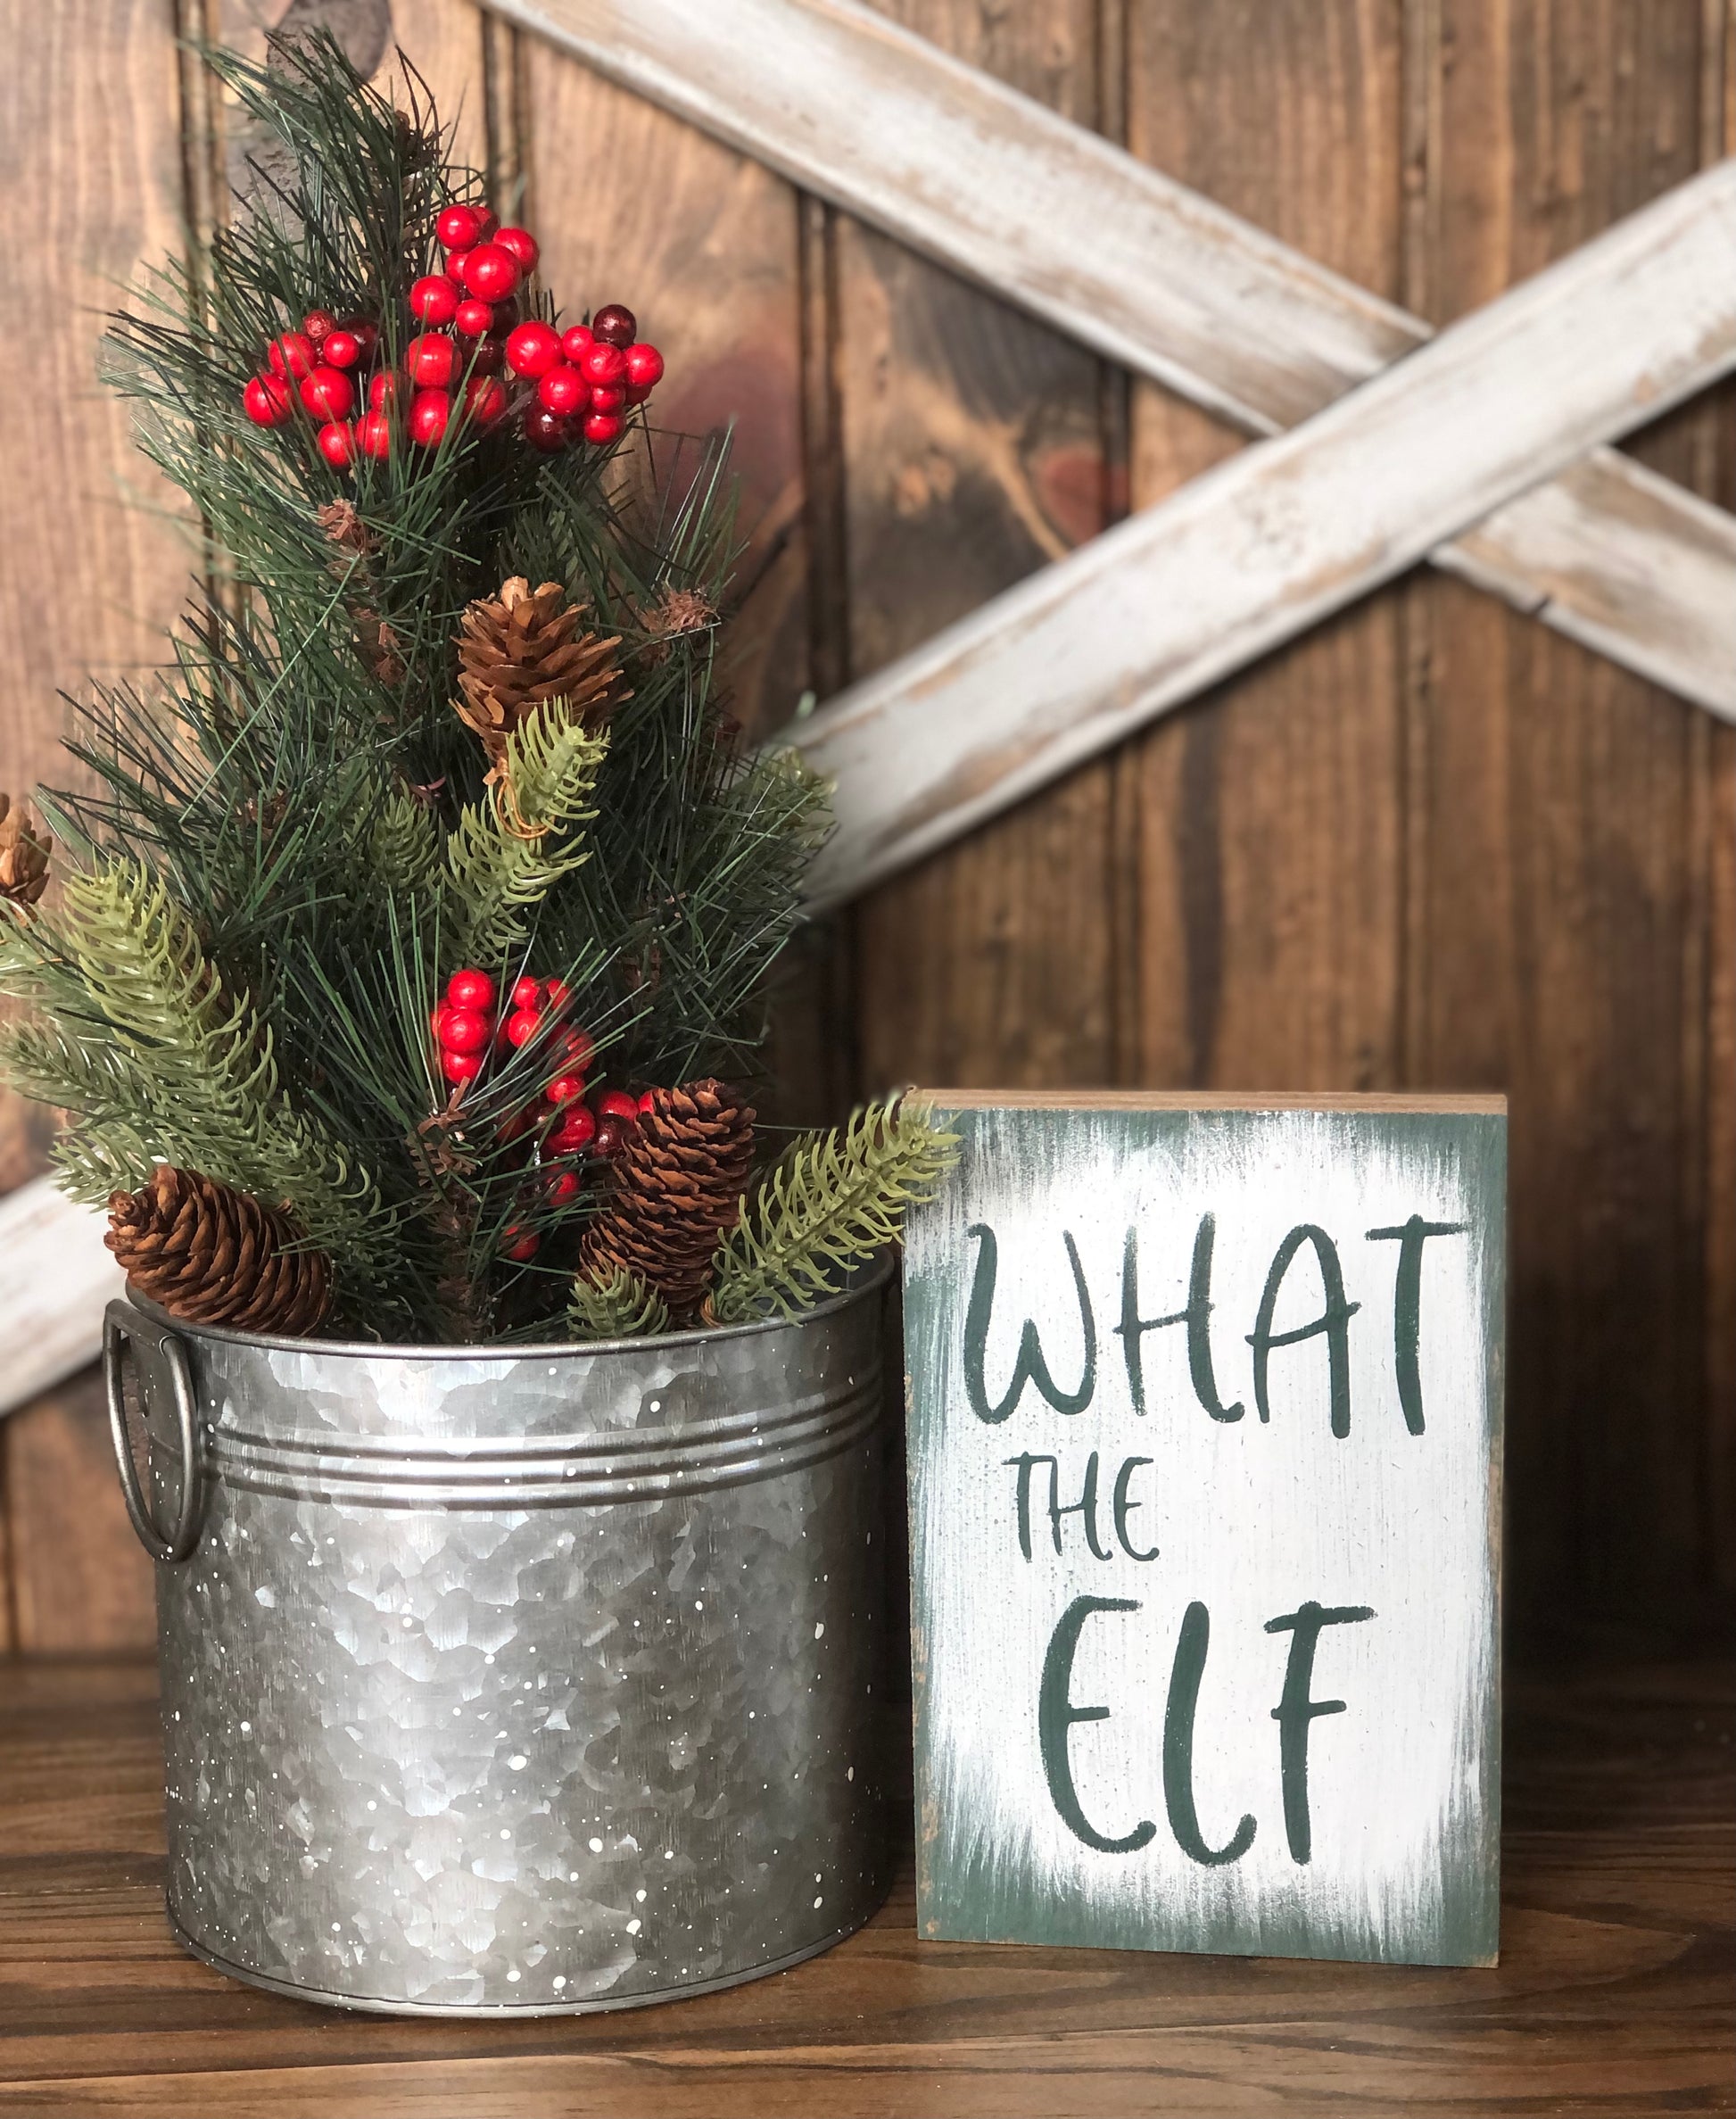 "What the elf" funny wood sign